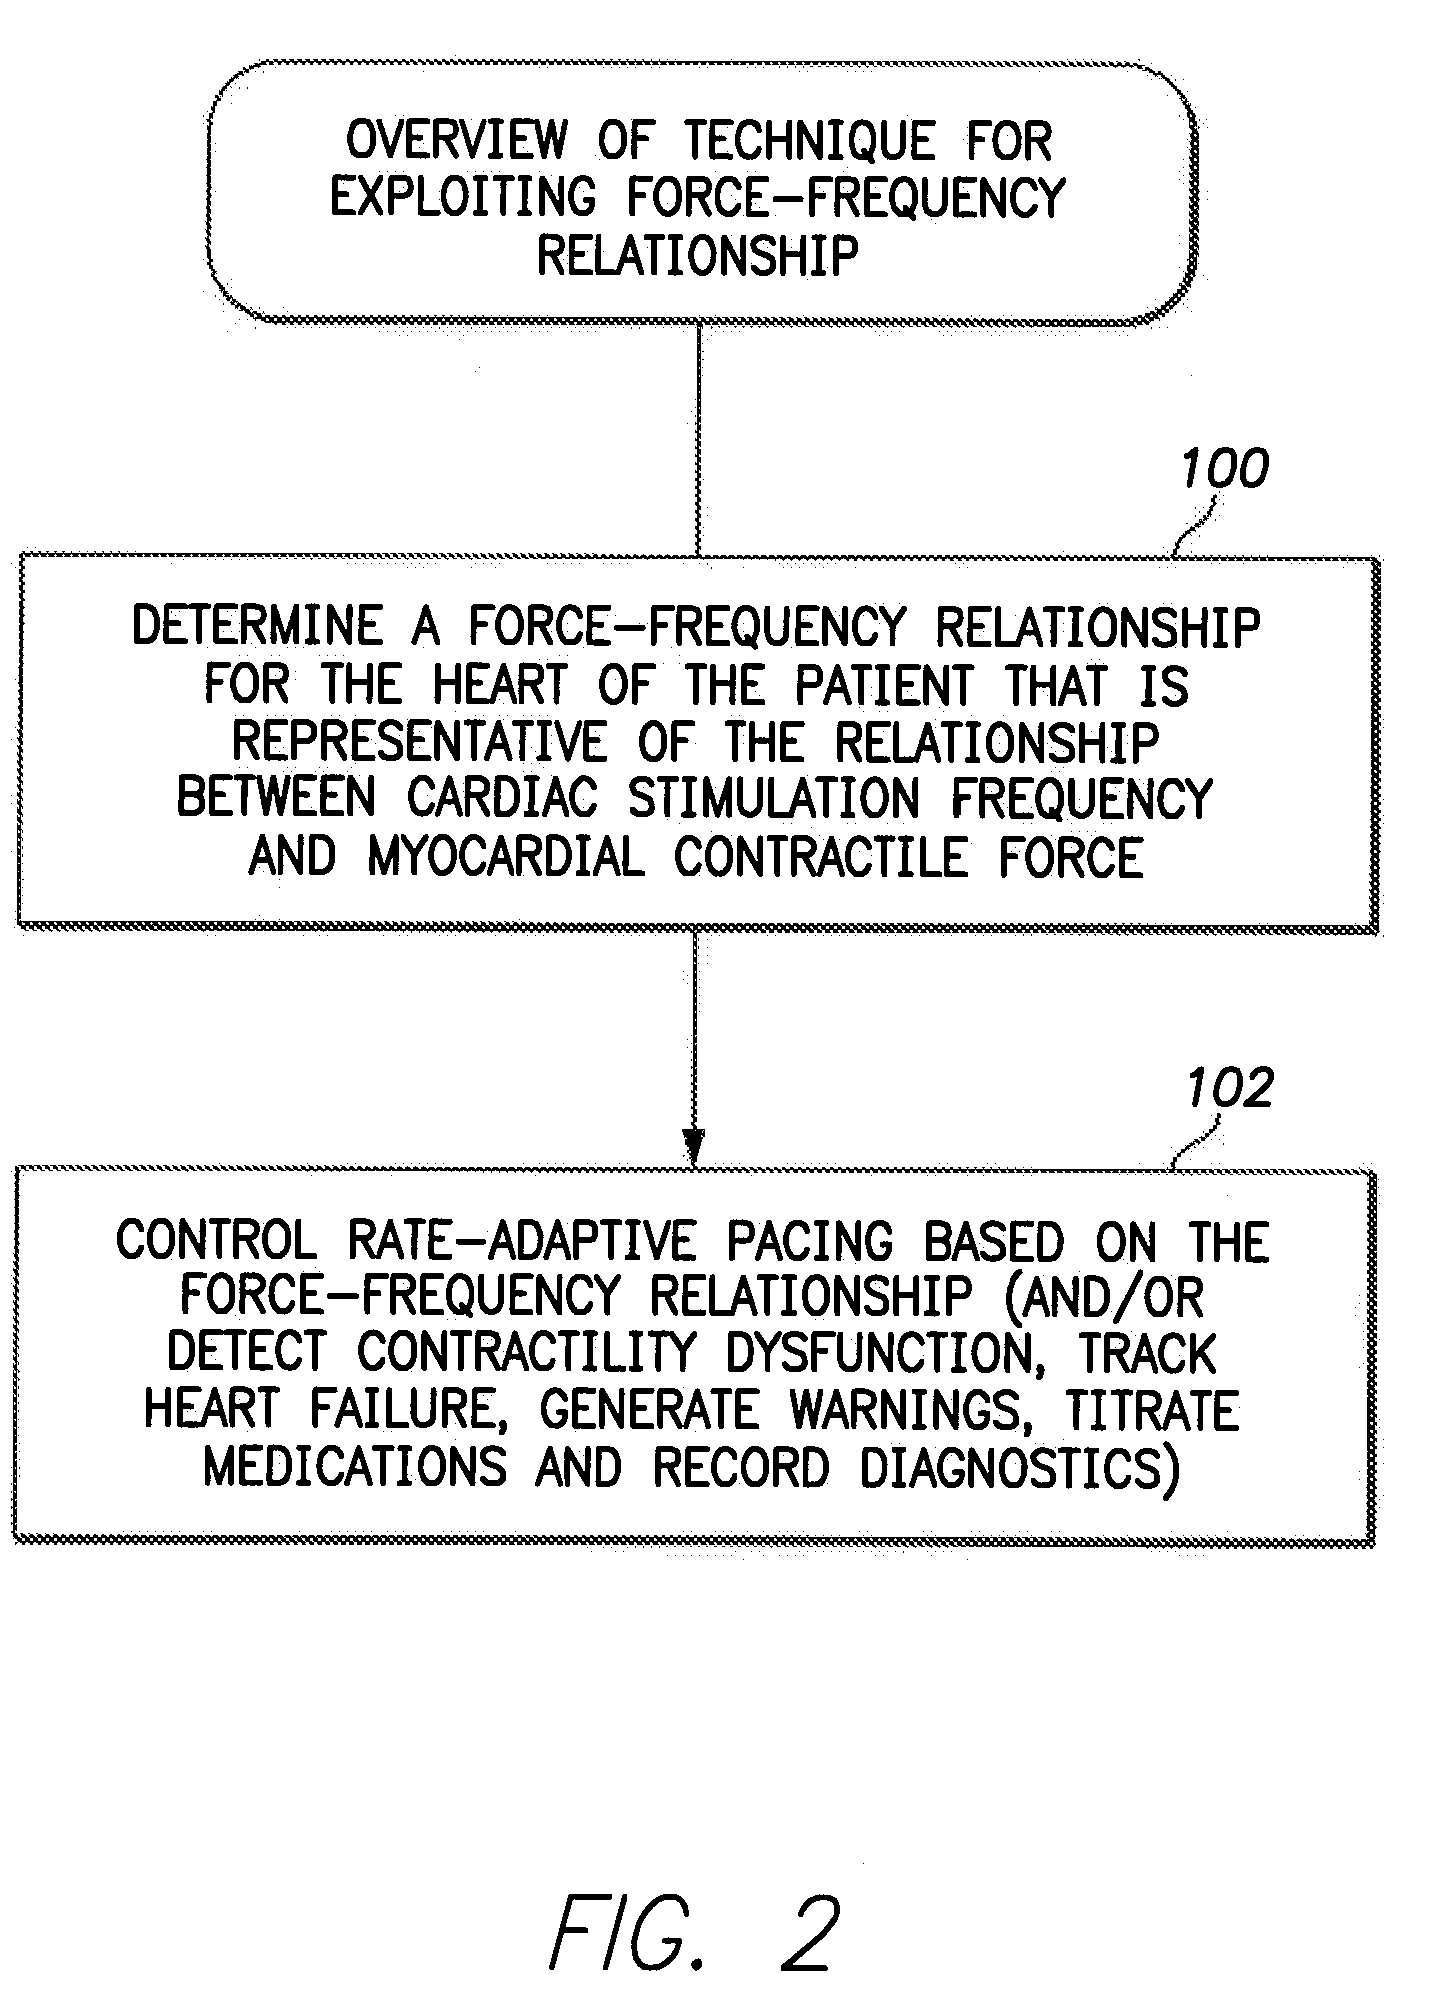 System and method for controlling rate-adaptive pacing based on a cardiac force-frequency relation detected by an implantable medical device